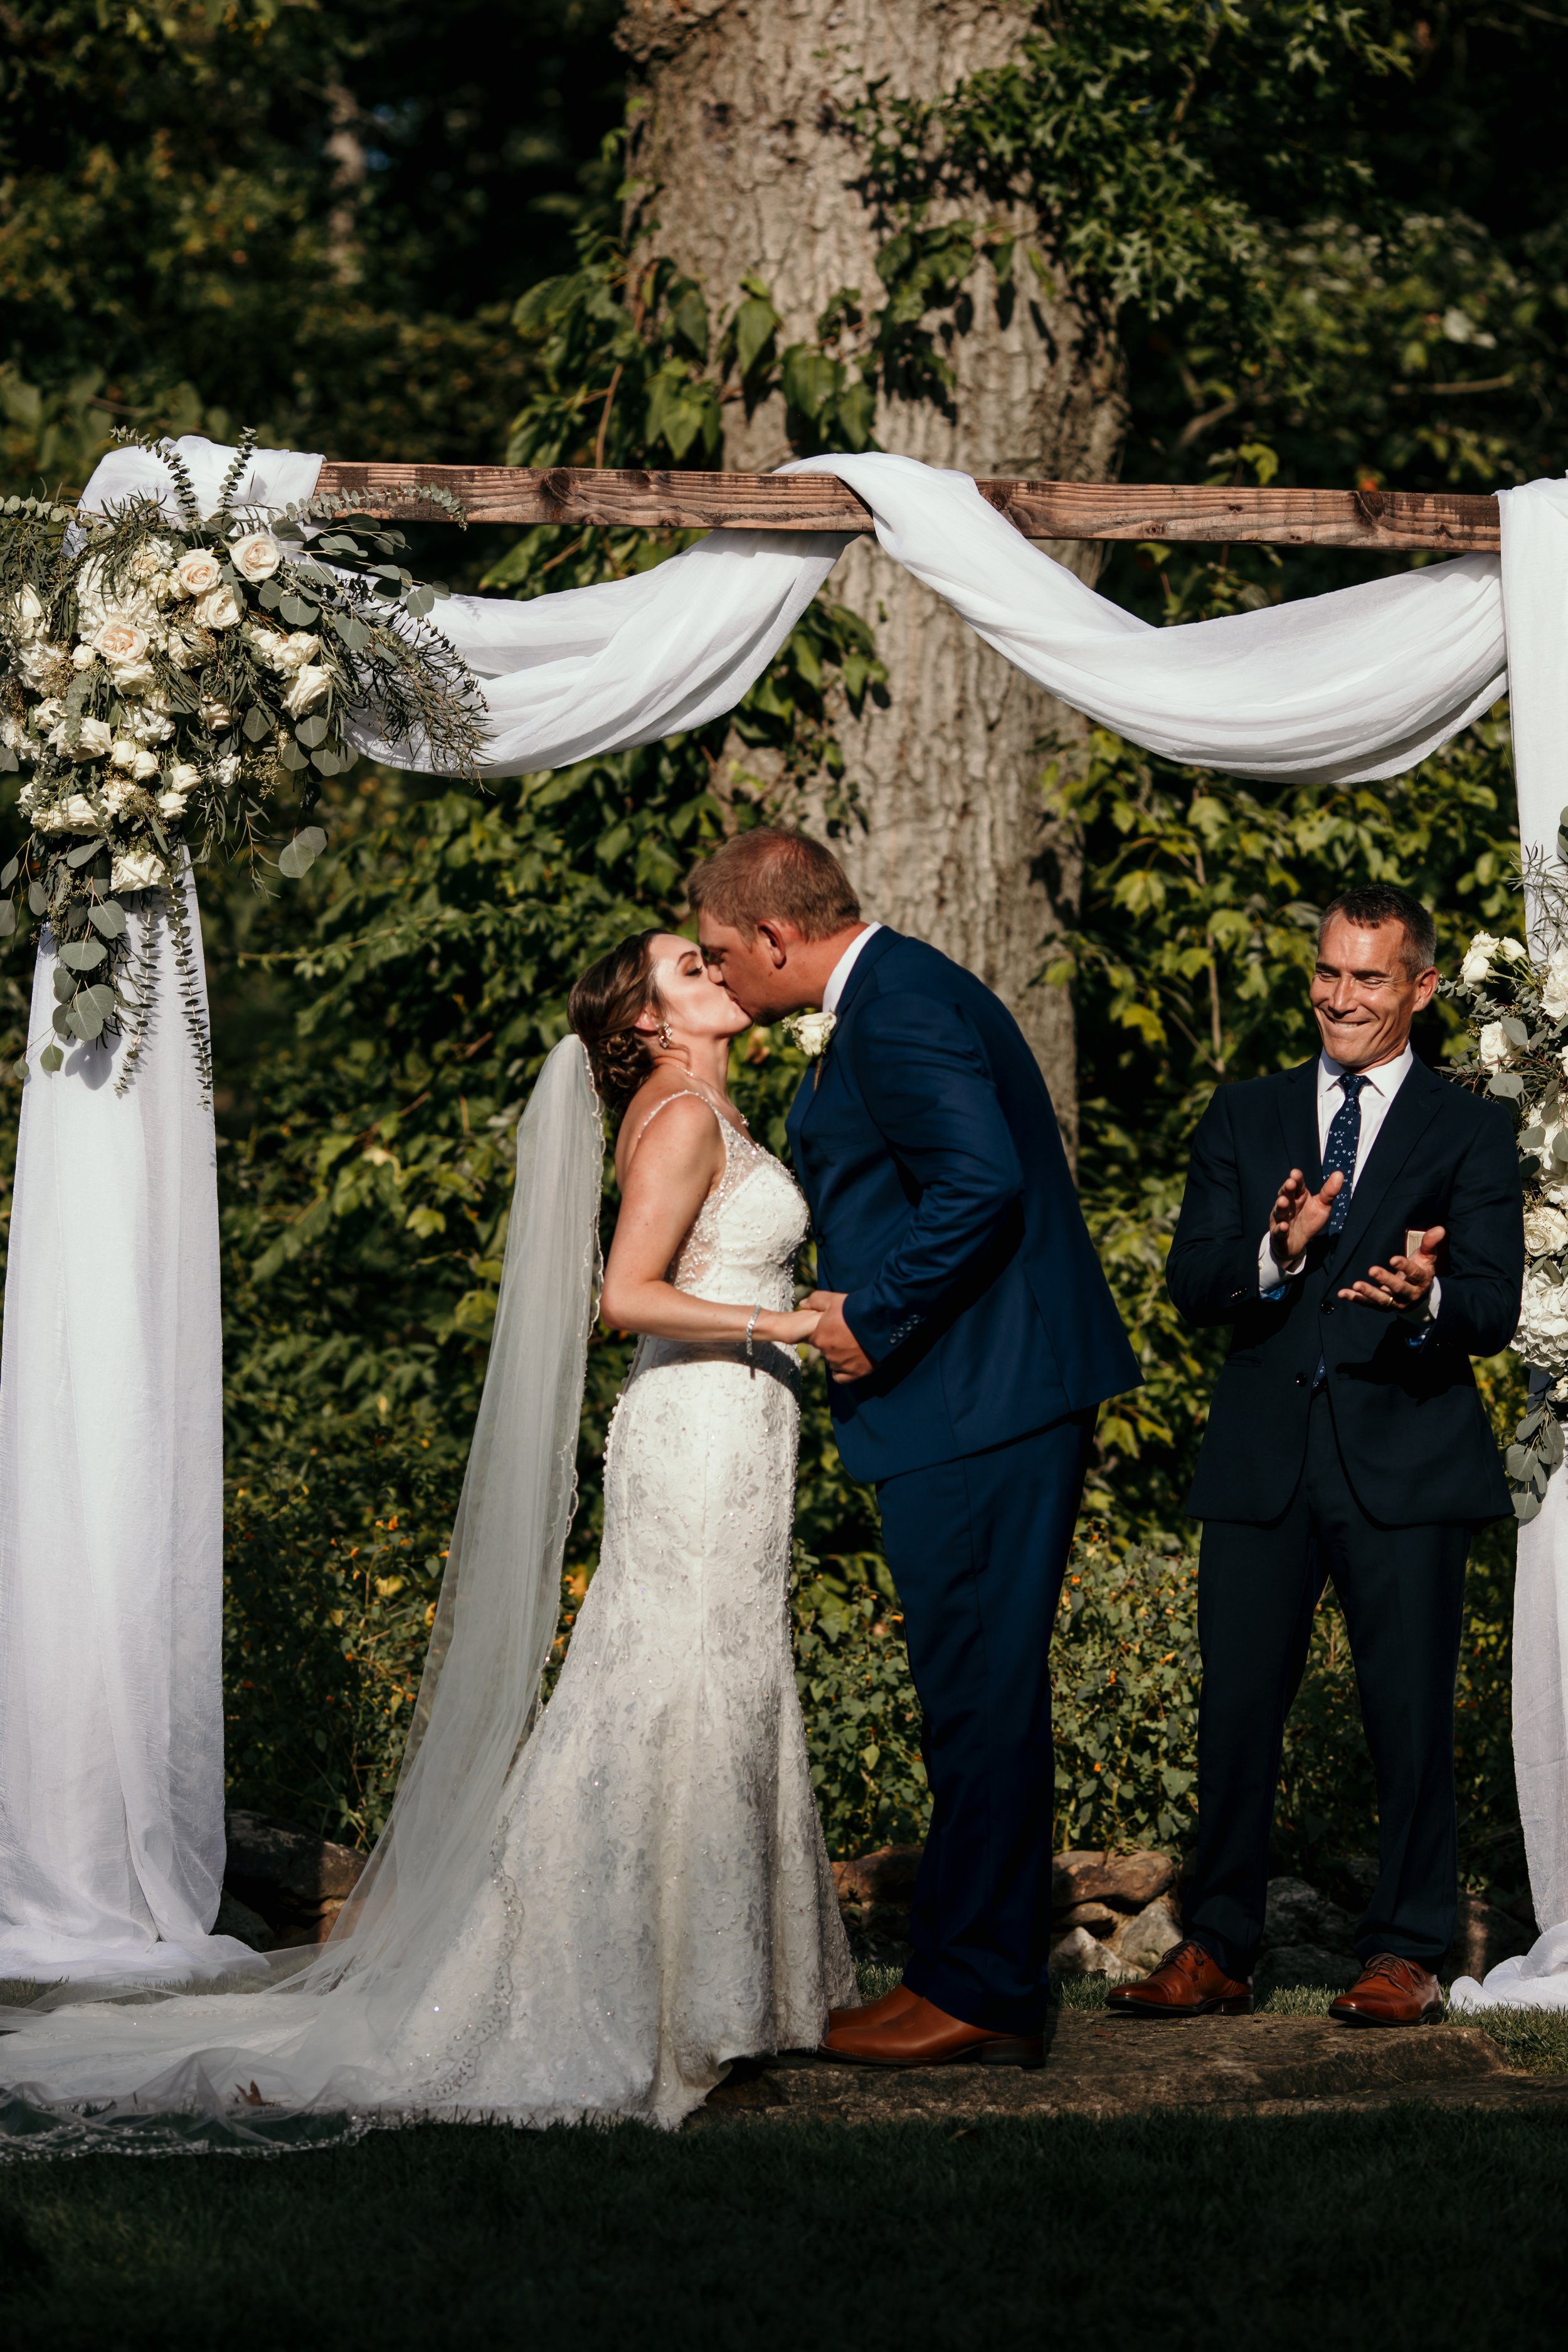 First kiss at the outdoor wedding ceremony and brandywine manor house.